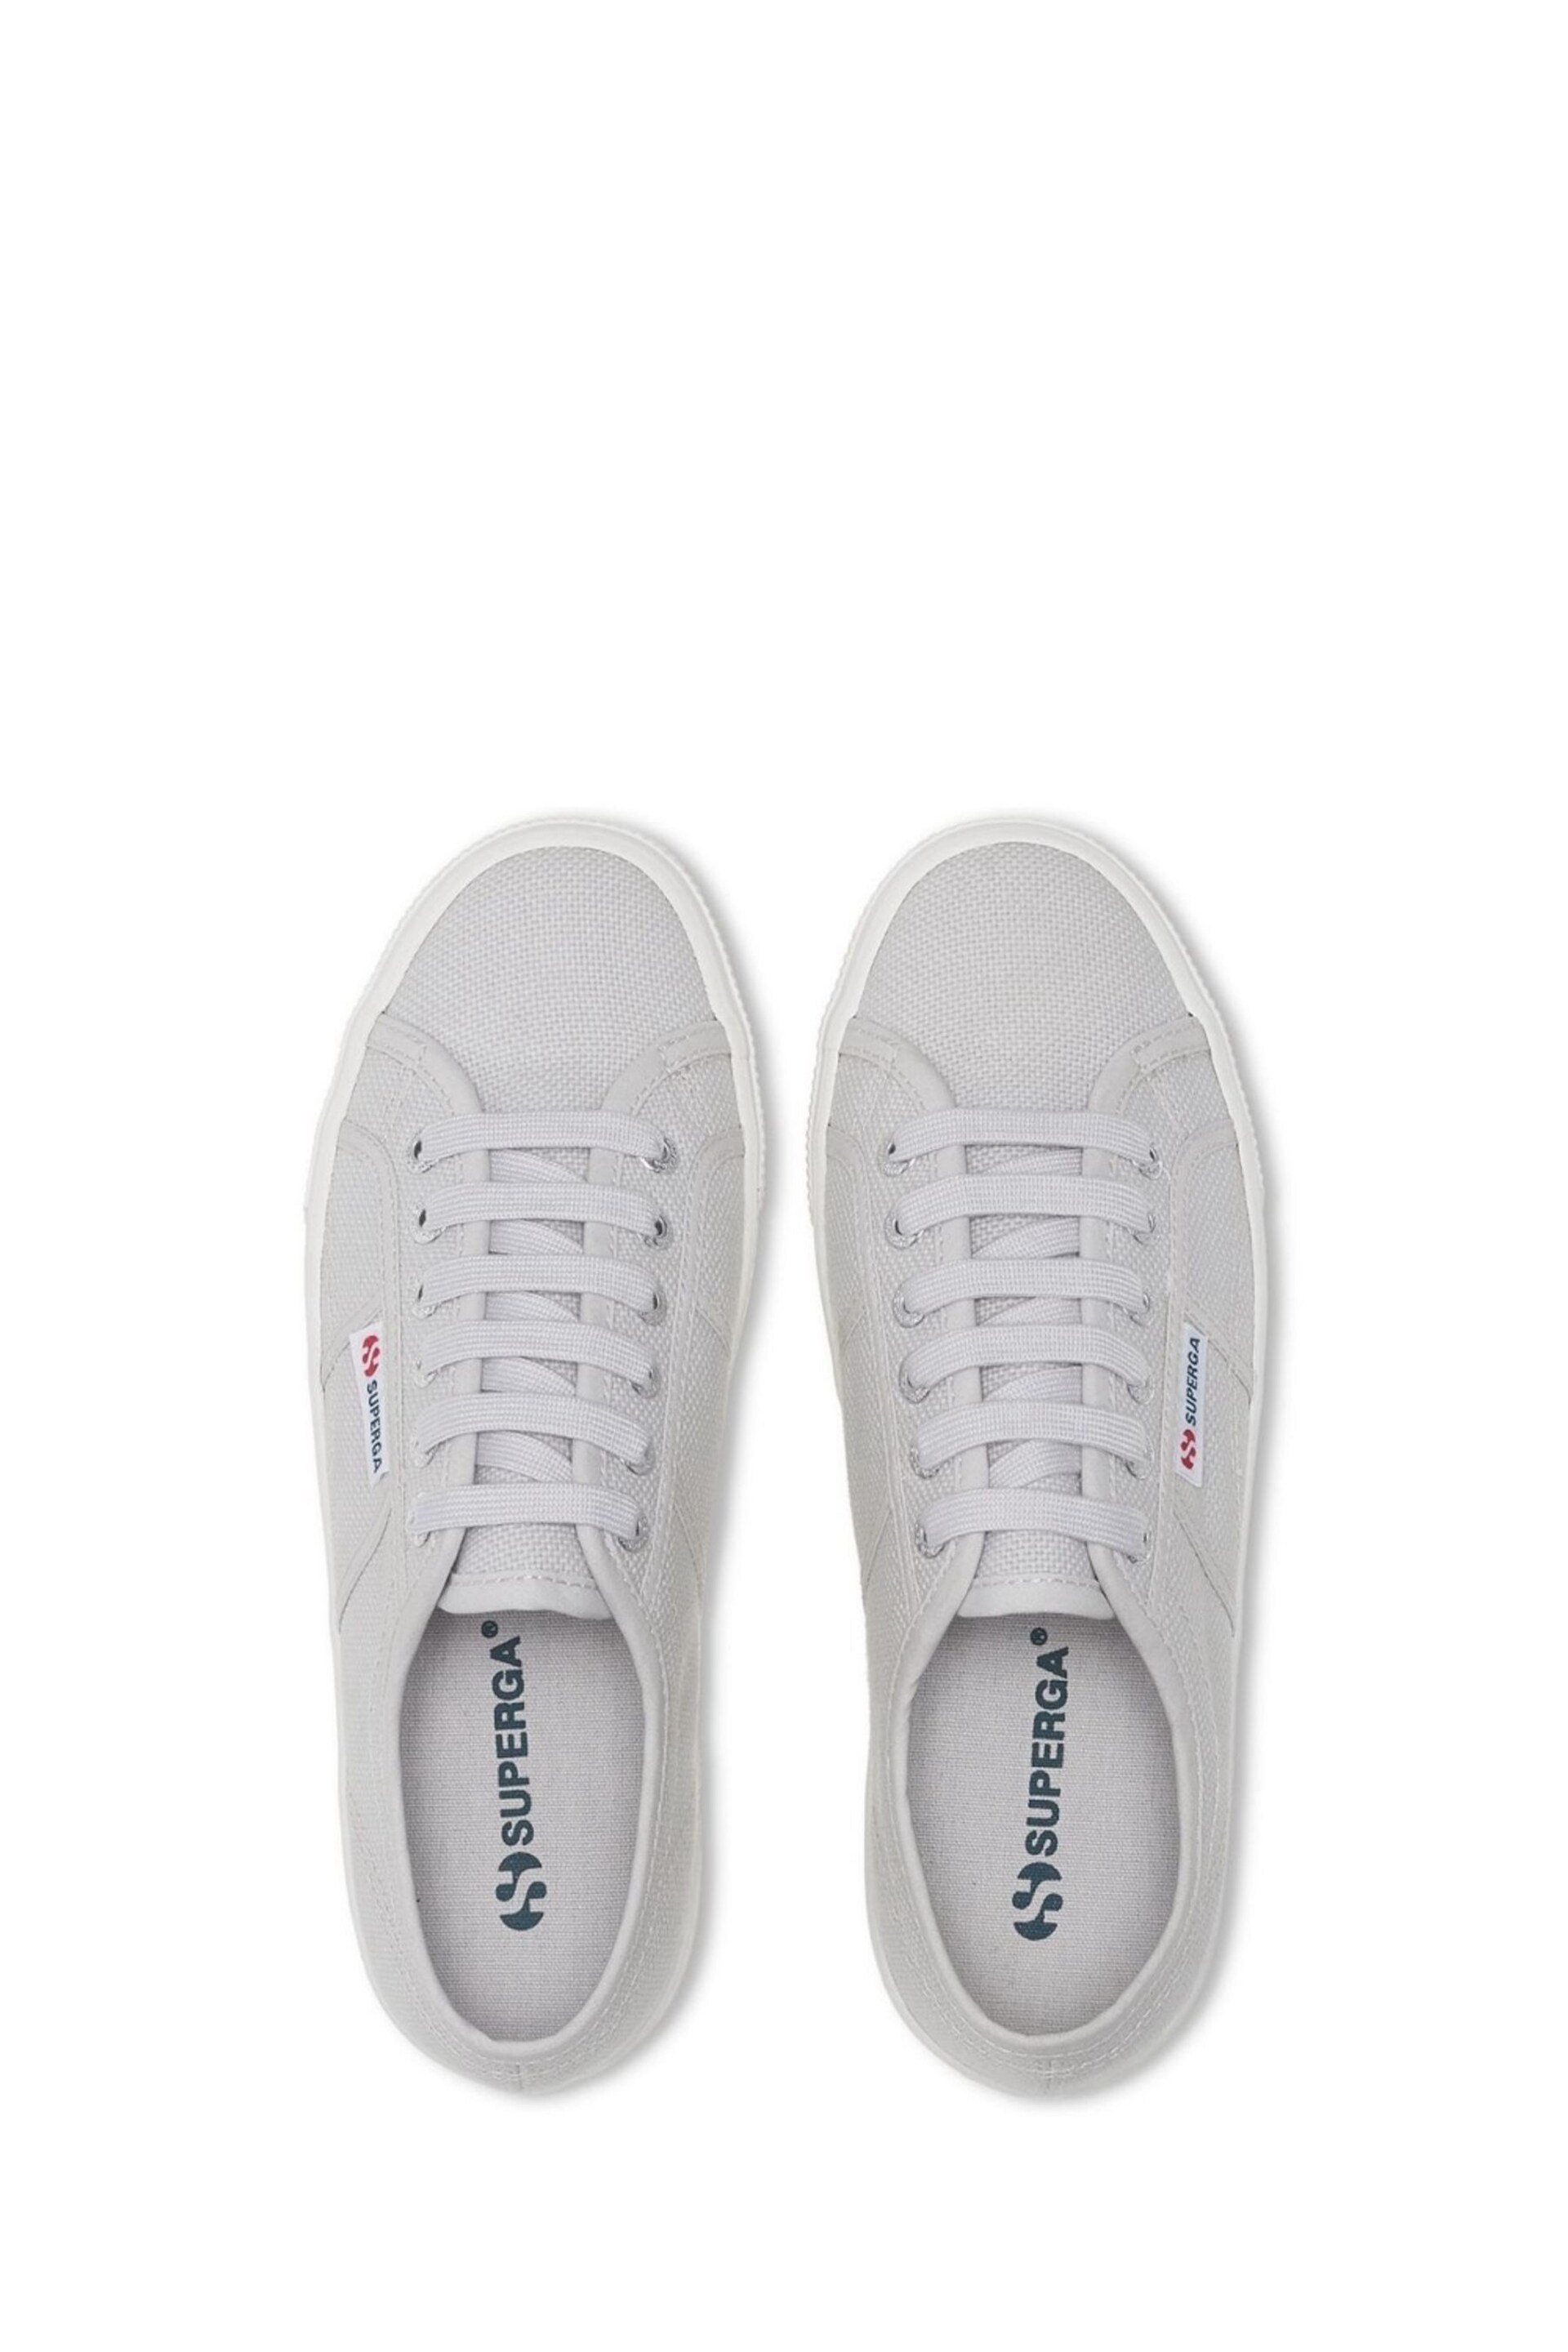 Superga Grey green 2790-Cotw Linea Up And Down Trainers - Image 4 of 5